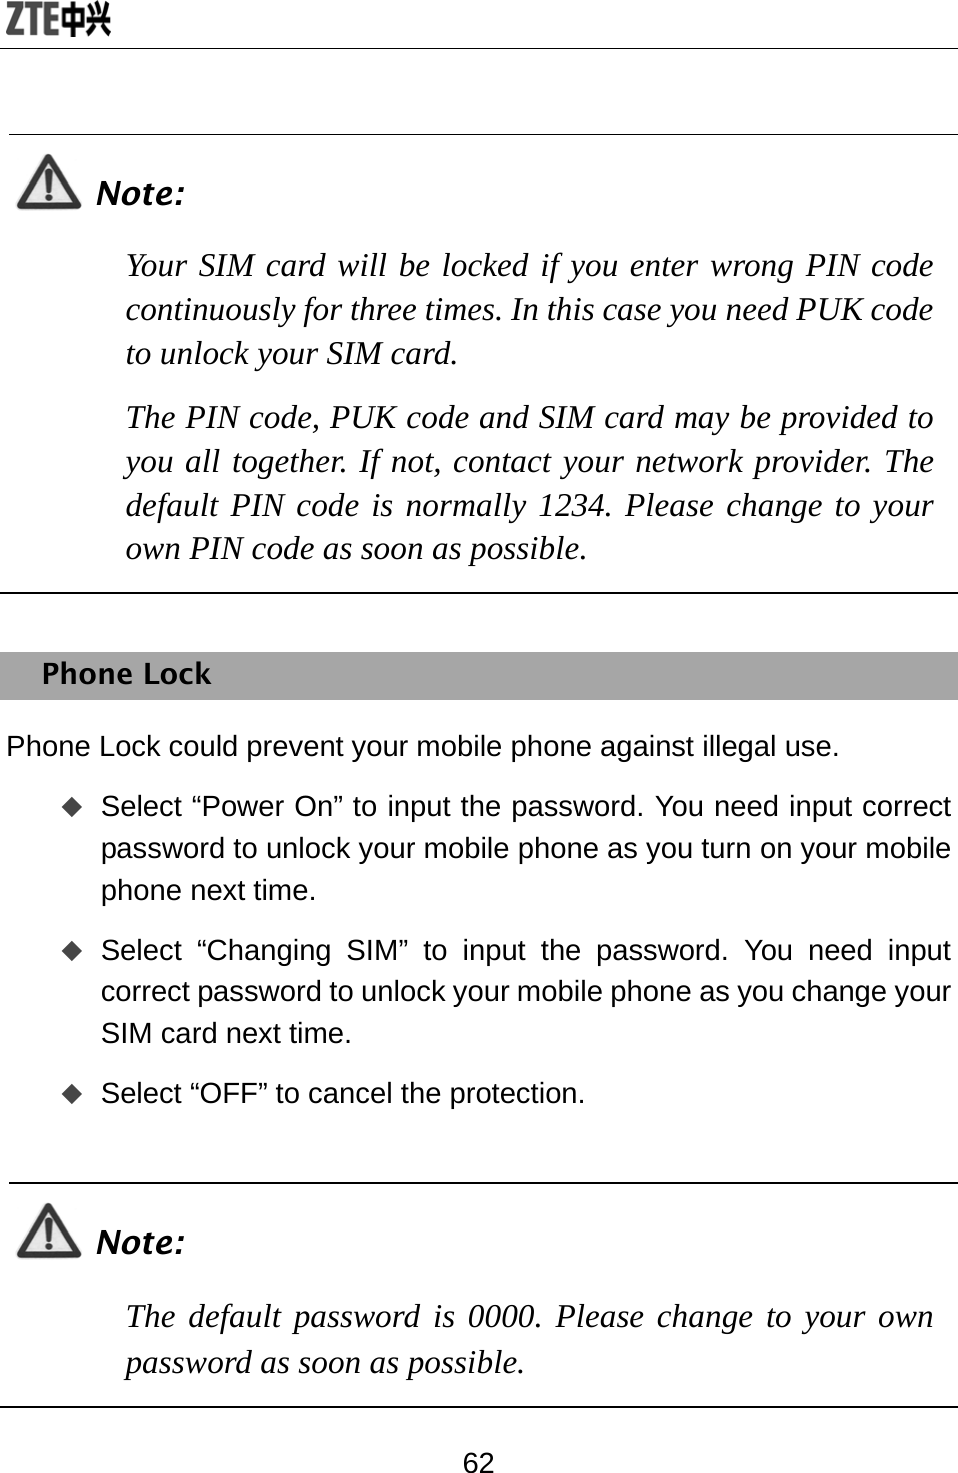  62  Note: Your SIM card will be locked if you enter wrong PIN code continuously for three times. In this case you need PUK code to unlock your SIM card.  The PIN code, PUK code and SIM card may be provided to you all together. If not, contact your network provider. The default PIN code is normally 1234. Please change to your own PIN code as soon as possible.  Phone Lock Phone Lock could prevent your mobile phone against illegal use.  Select “Power On” to input the password. You need input correct password to unlock your mobile phone as you turn on your mobile phone next time.  Select “Changing SIM” to input the password. You need input correct password to unlock your mobile phone as you change your SIM card next time.  Select “OFF” to cancel the protection.  Note: The default password is 0000. Please change to your own password as soon as possible.  